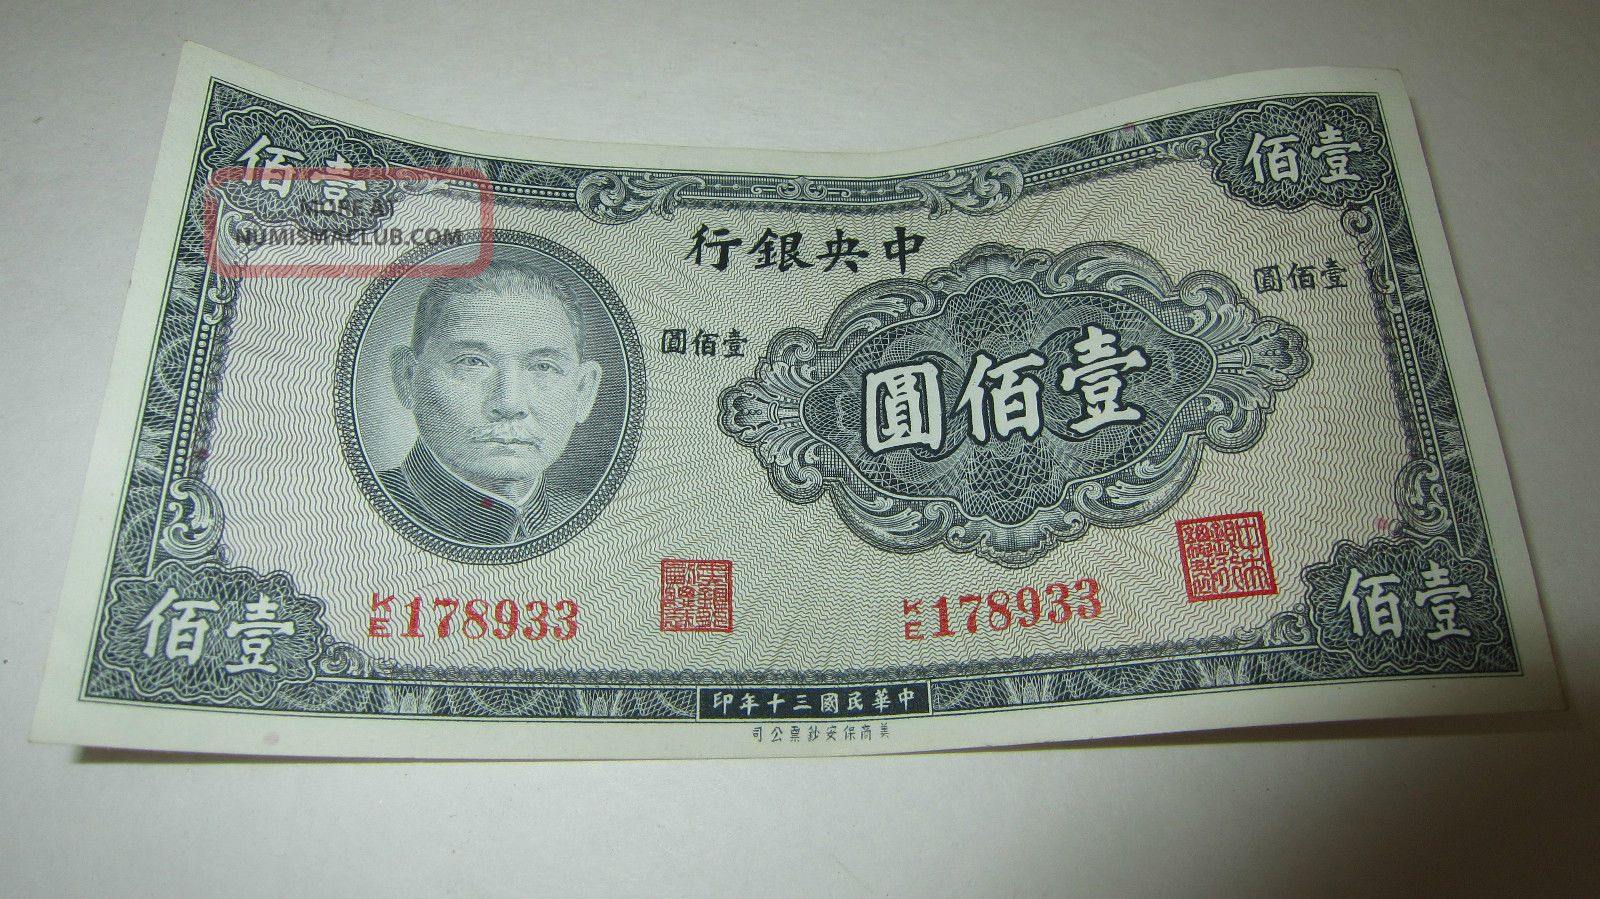 1941 Central Bank Of China 100 Yuan Bill Is Crisp Asia photo